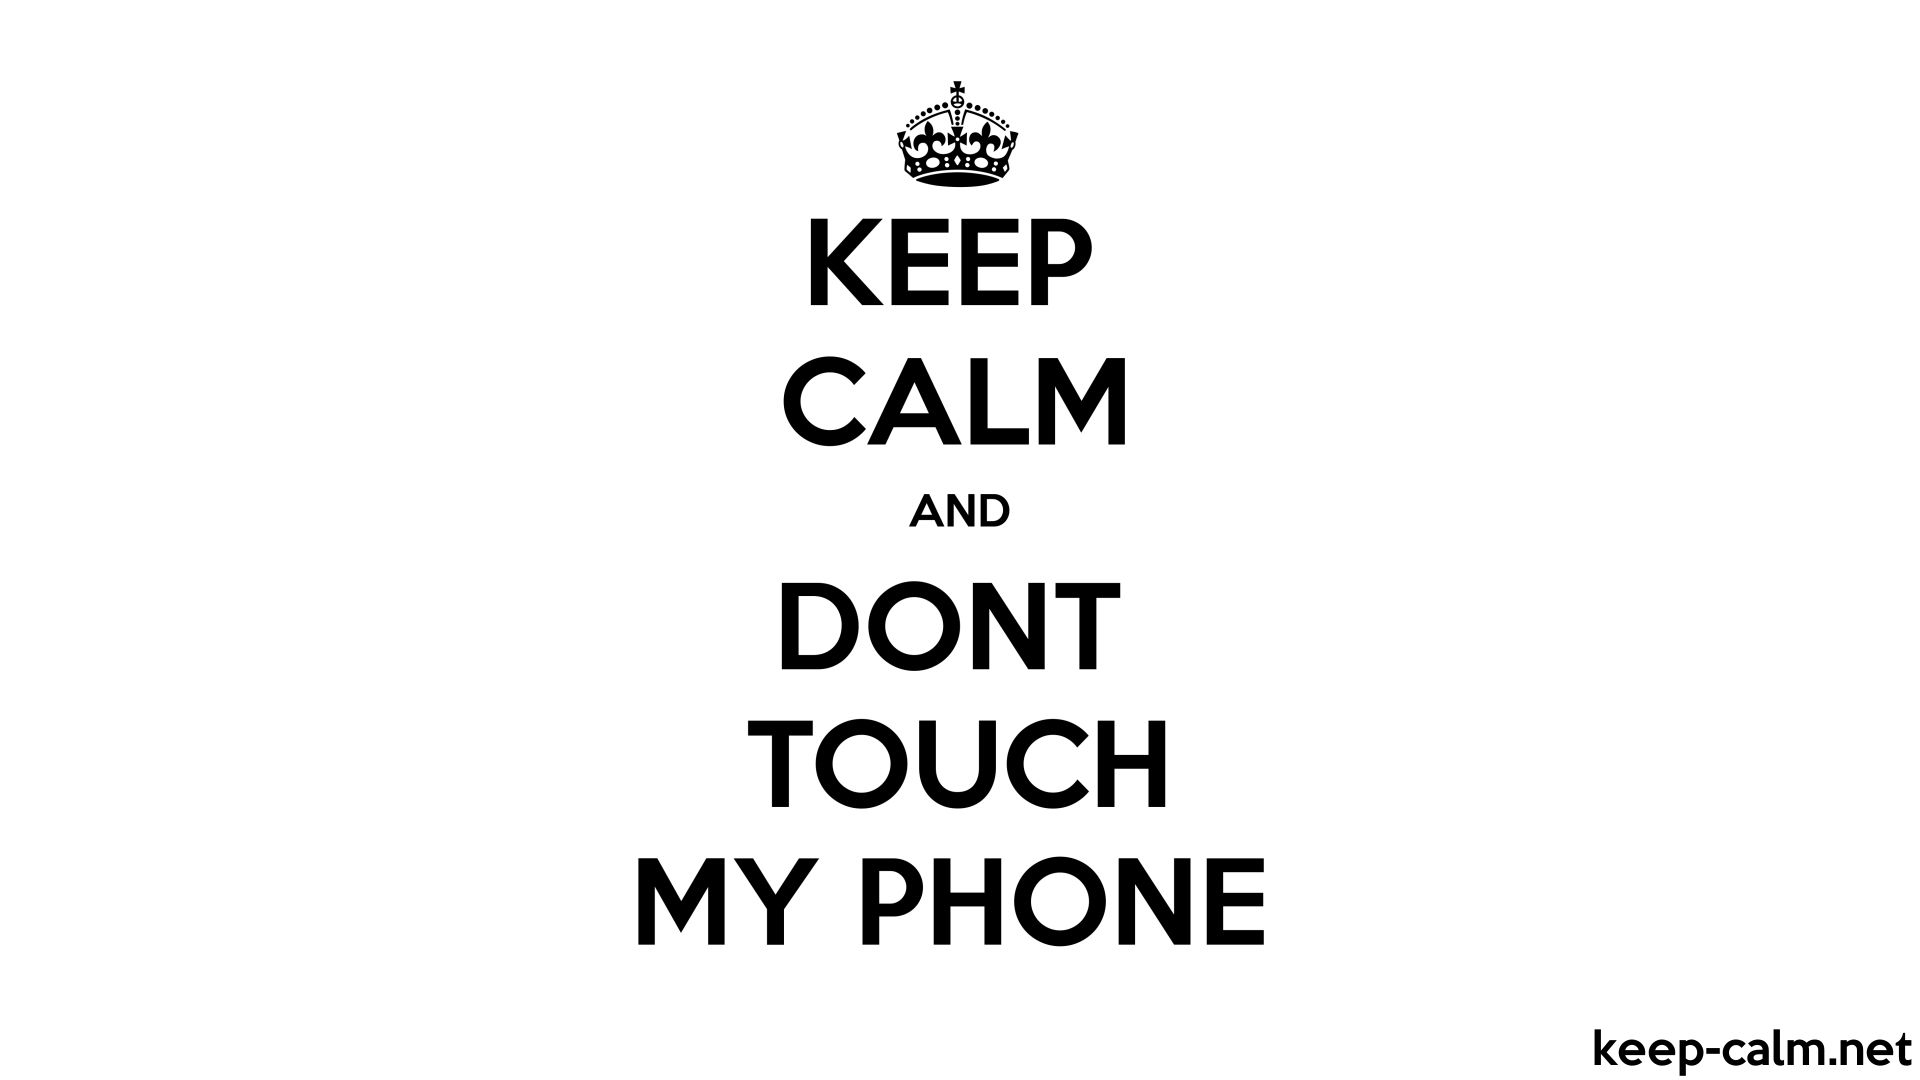 KEEP CALM AND DONT TOUCH MY PHONE